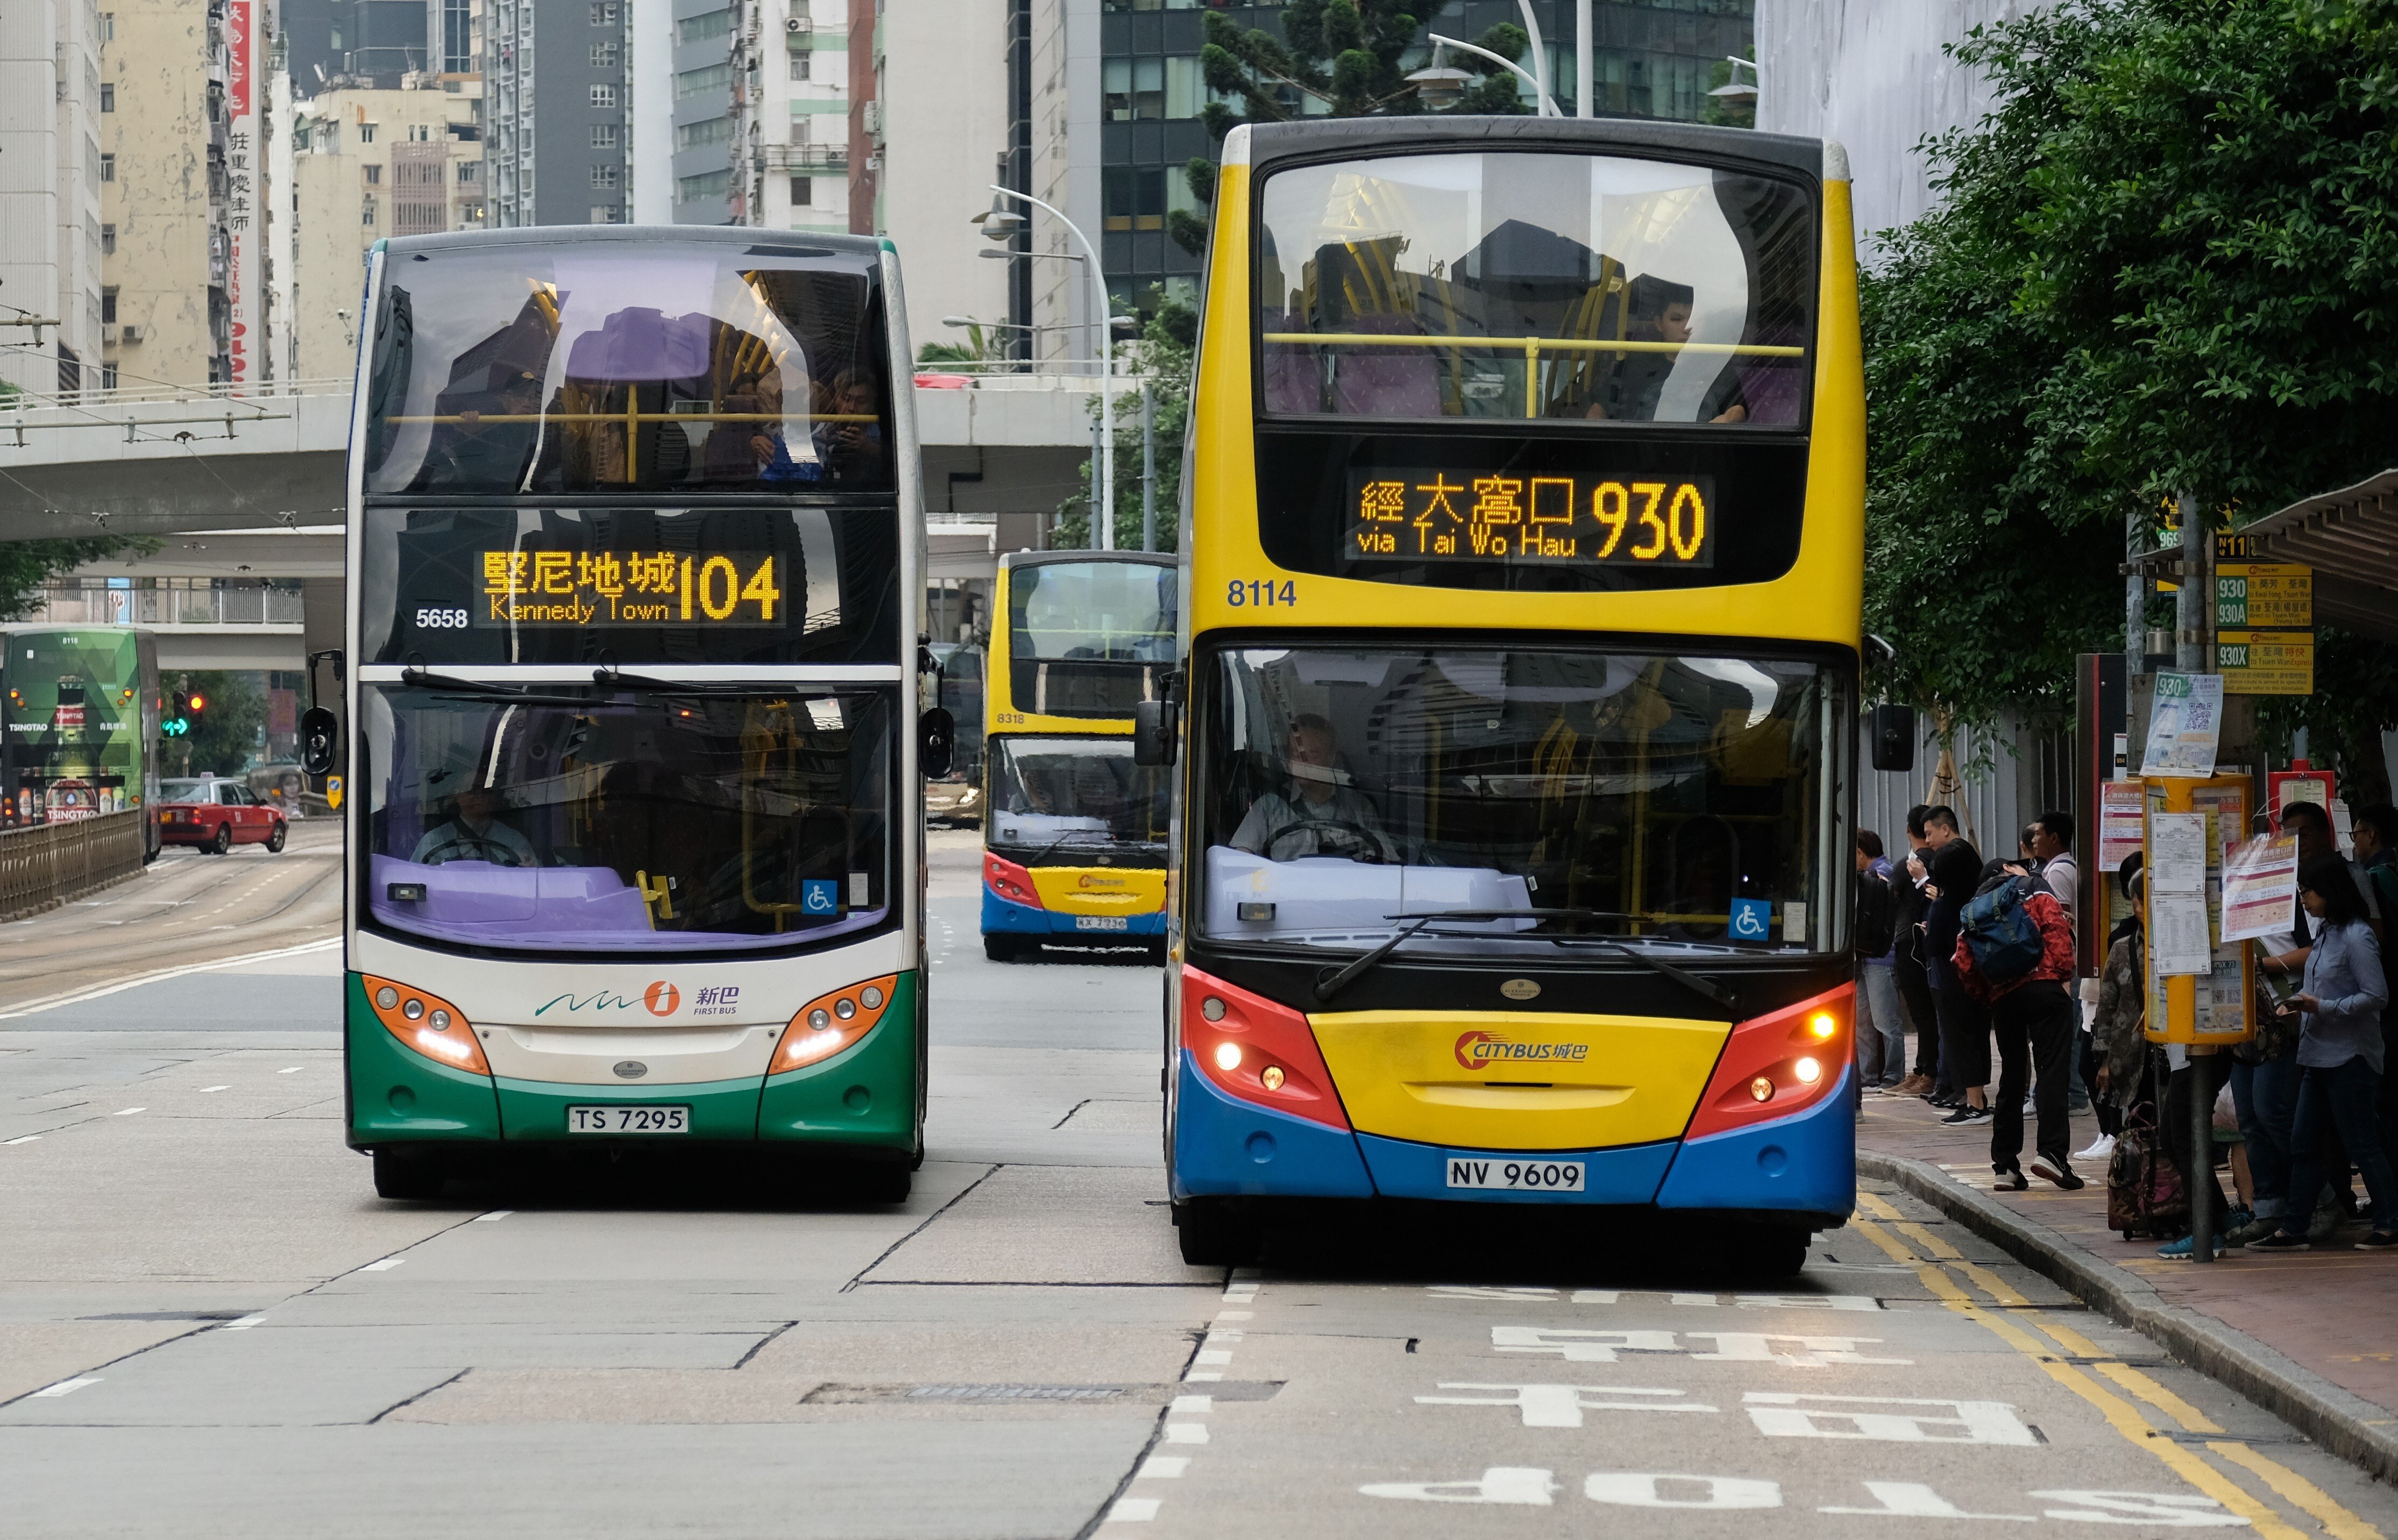 A New World First Bus (left) and Citybus on Queensway, in Admiralty. Photo: Fung Chang